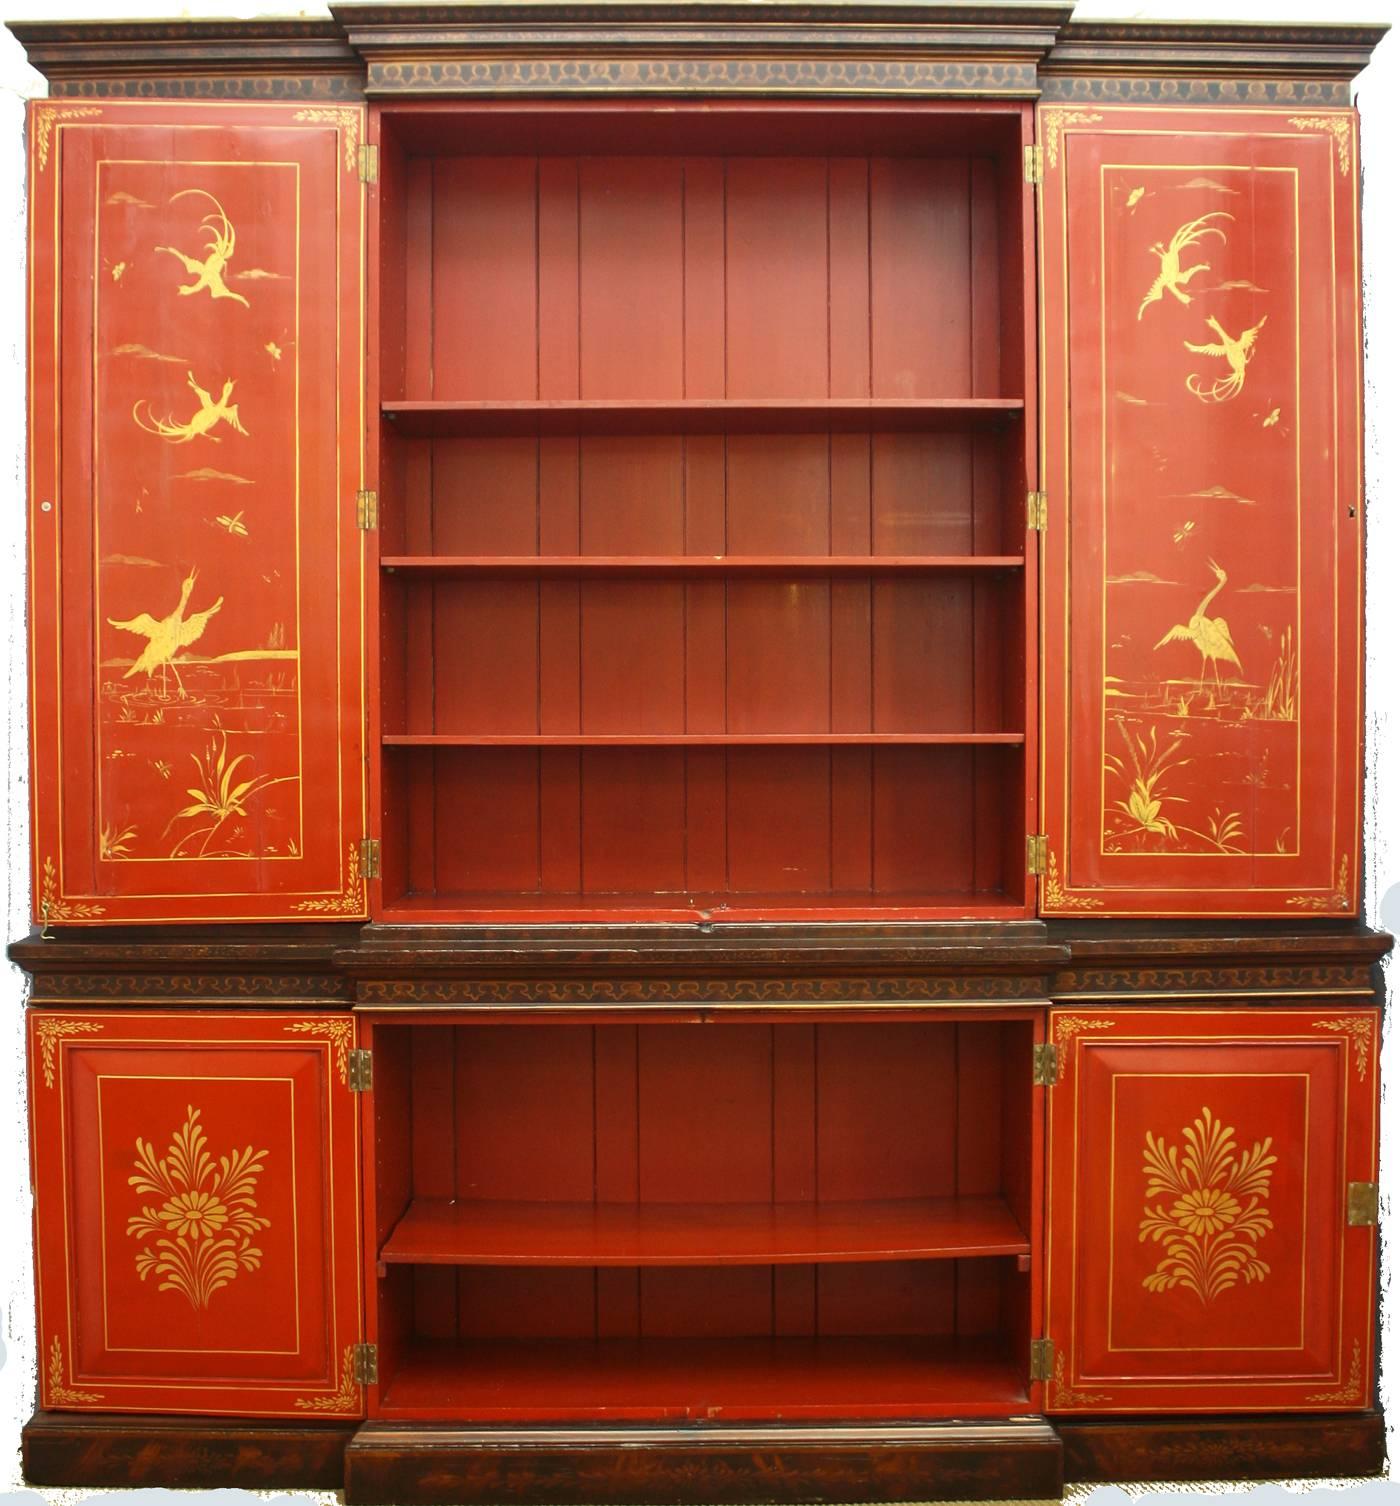 A George III breakfront bookcase with later Japanned chinoiserie decoration, a molded cornice above two central paneled doors, flanked on each side by like doors, cinnabar colored interior with more decoration on the backside of the doors, upper